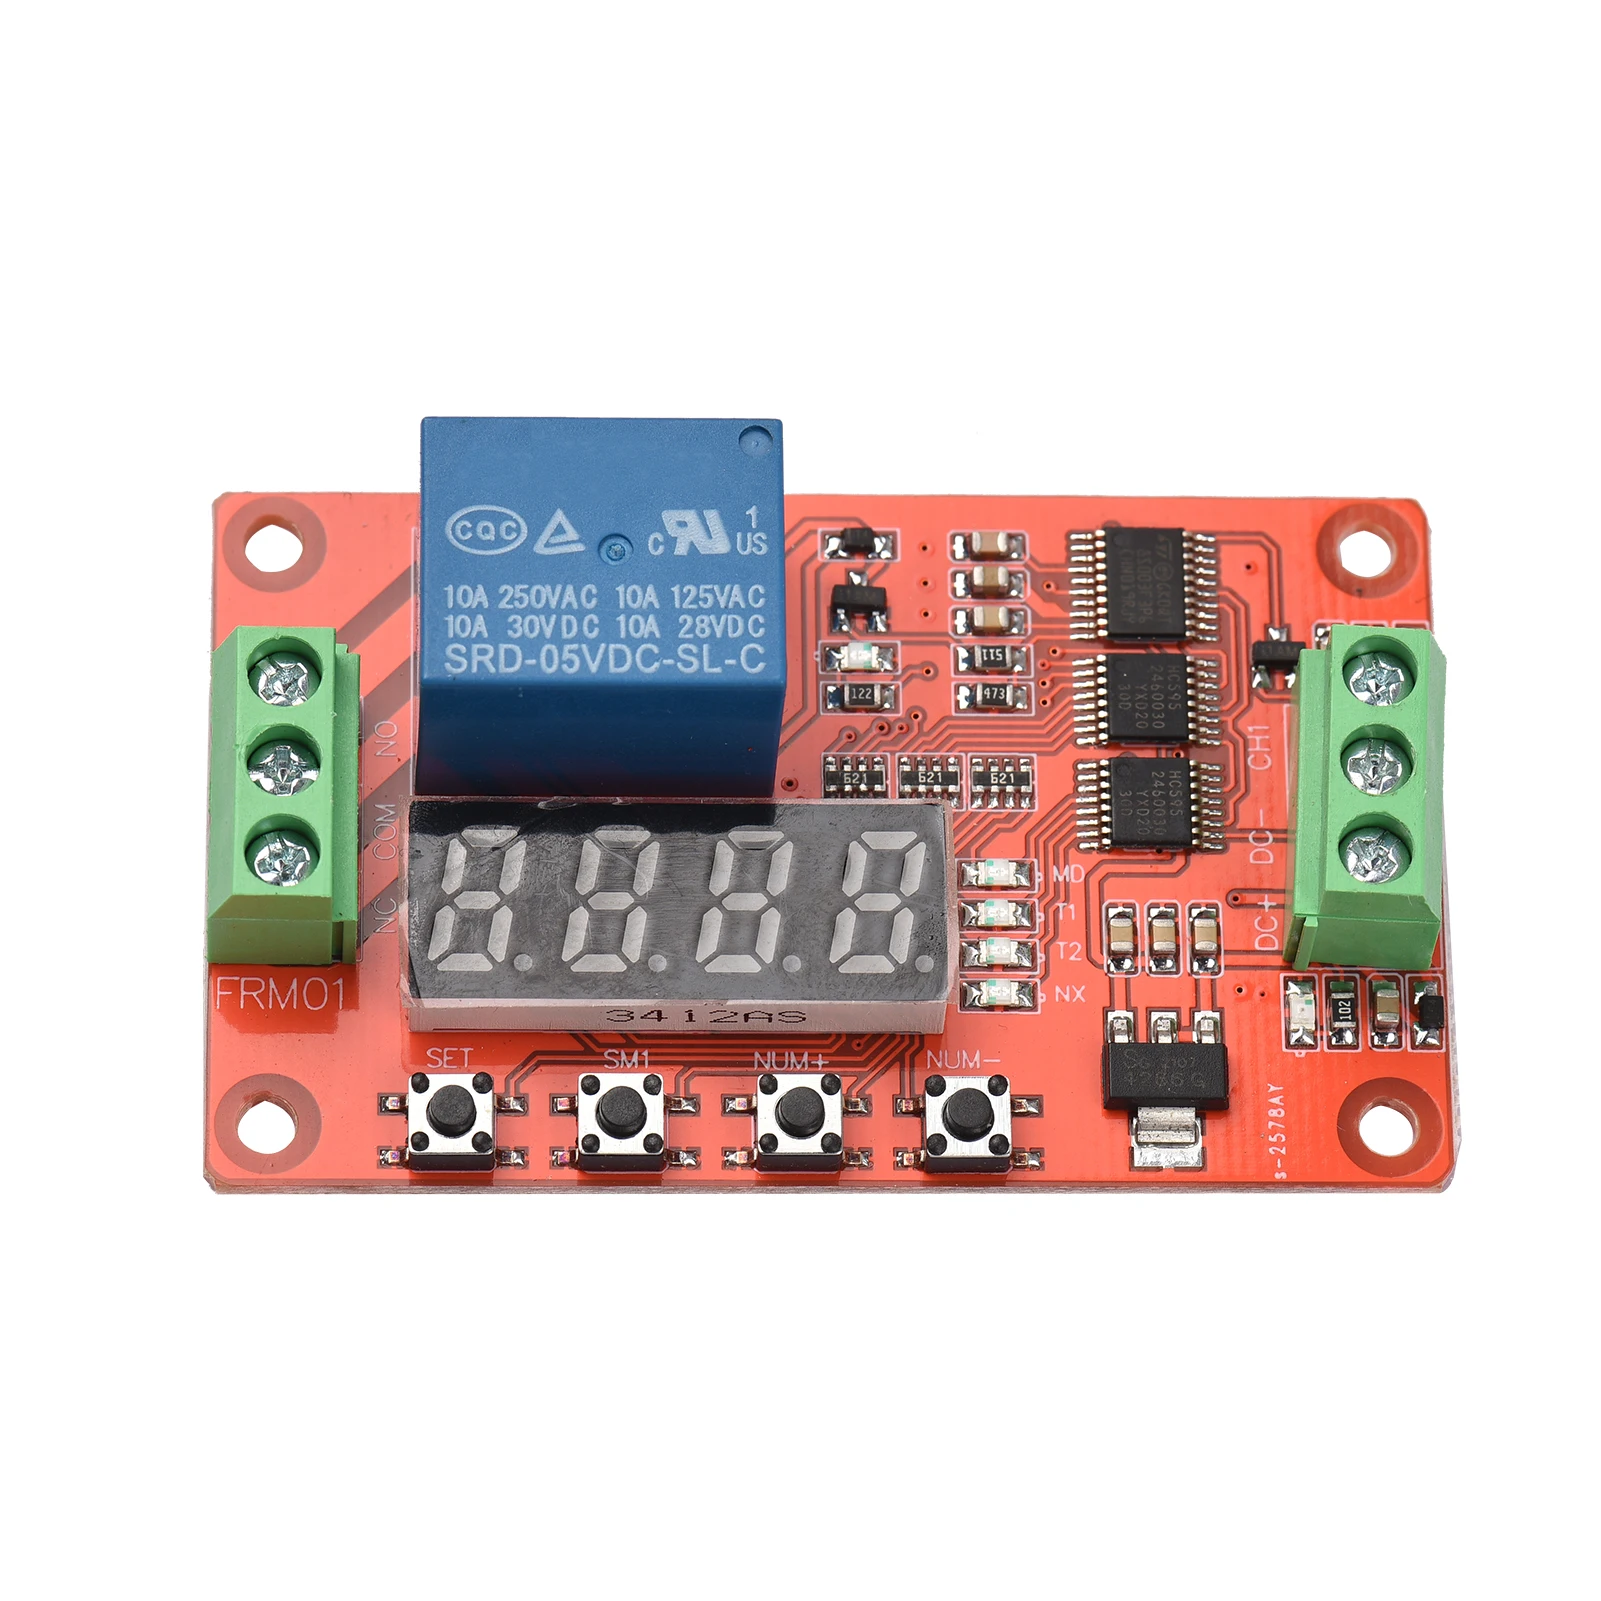 

FRM01 Relay Module Timing Delay Cycle Self-lock Multi-function Relay Control PCB Board High Power For Household Tools